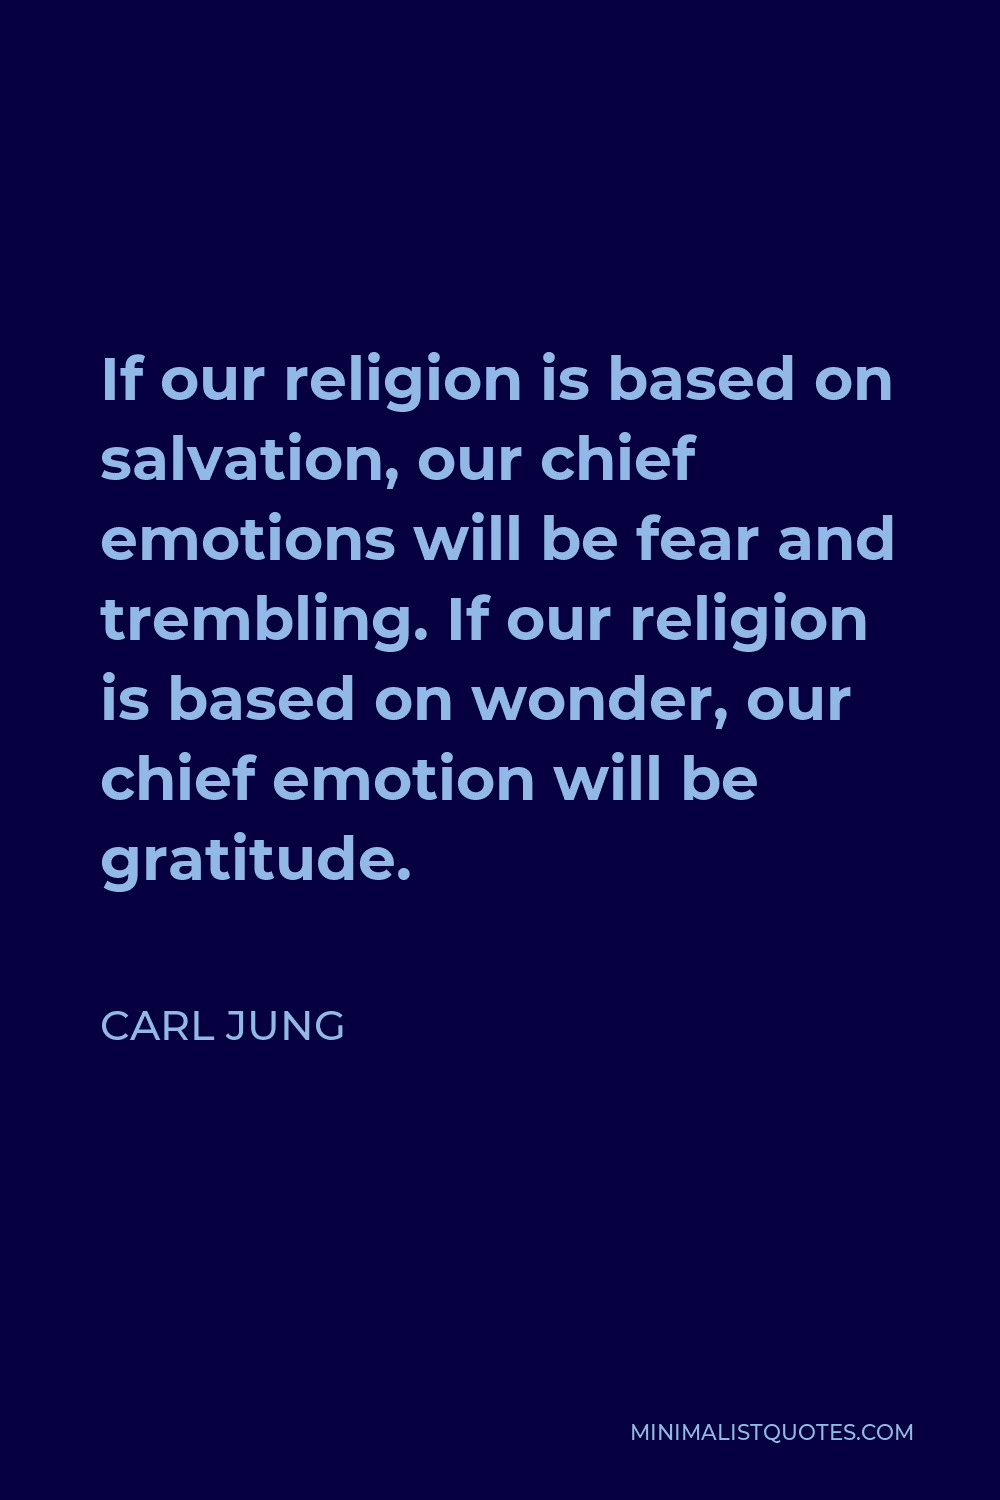 Carl Jung Quote - If our religion is based on salvation, our chief emotions will be fear and trembling. If our religion is based on wonder, our chief emotion will be gratitude.